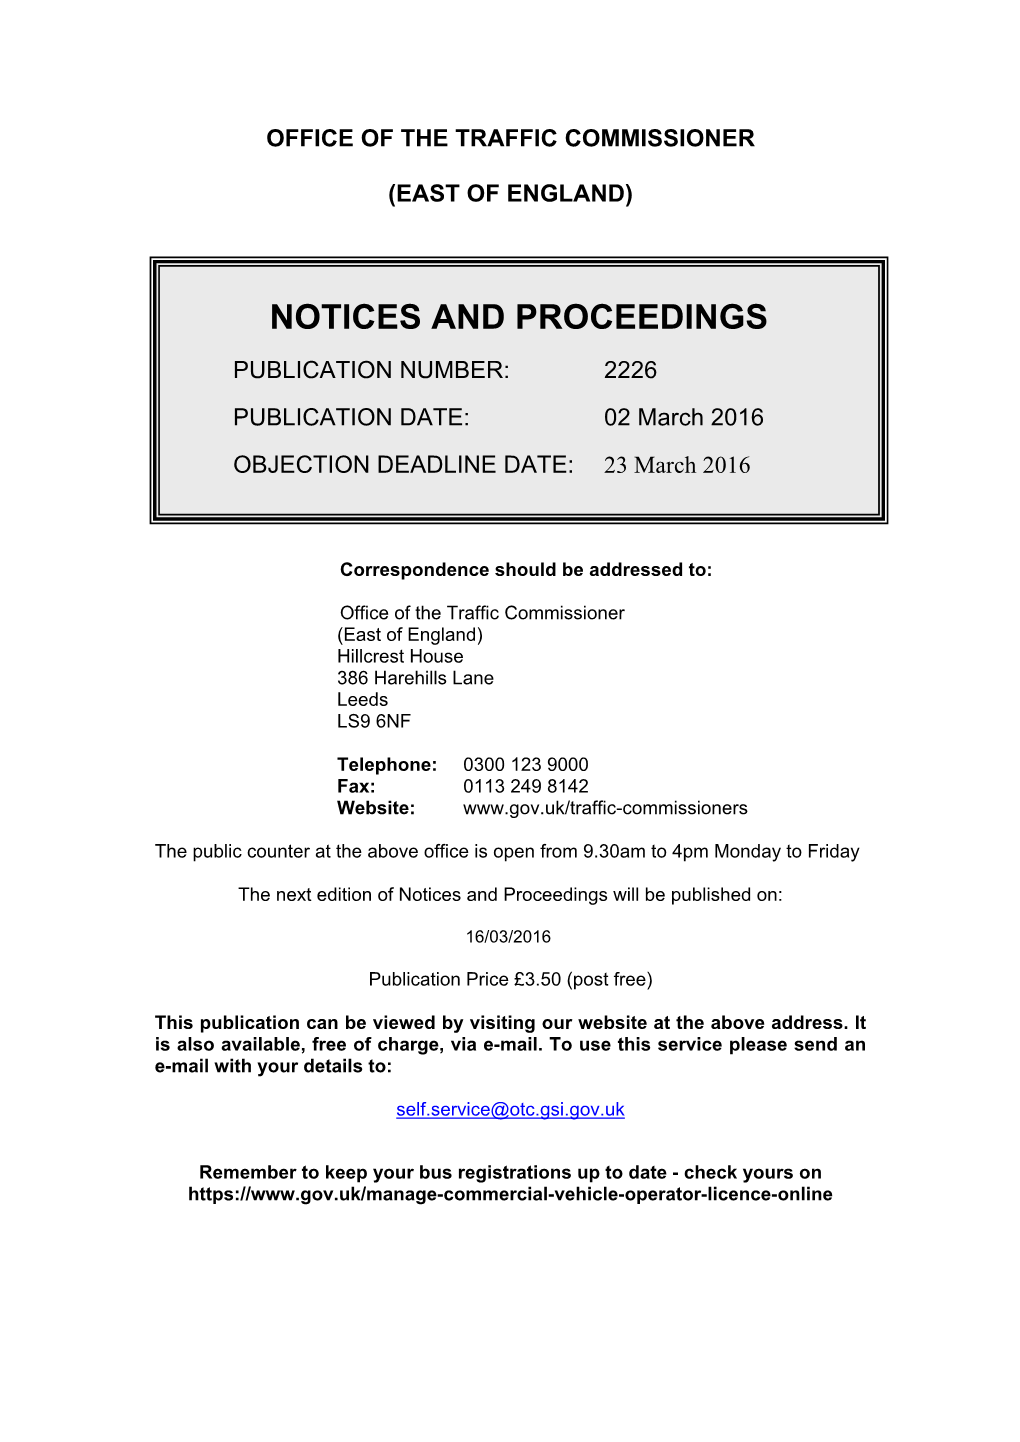 NOTICES and PROCEEDINGS 02 March 2016